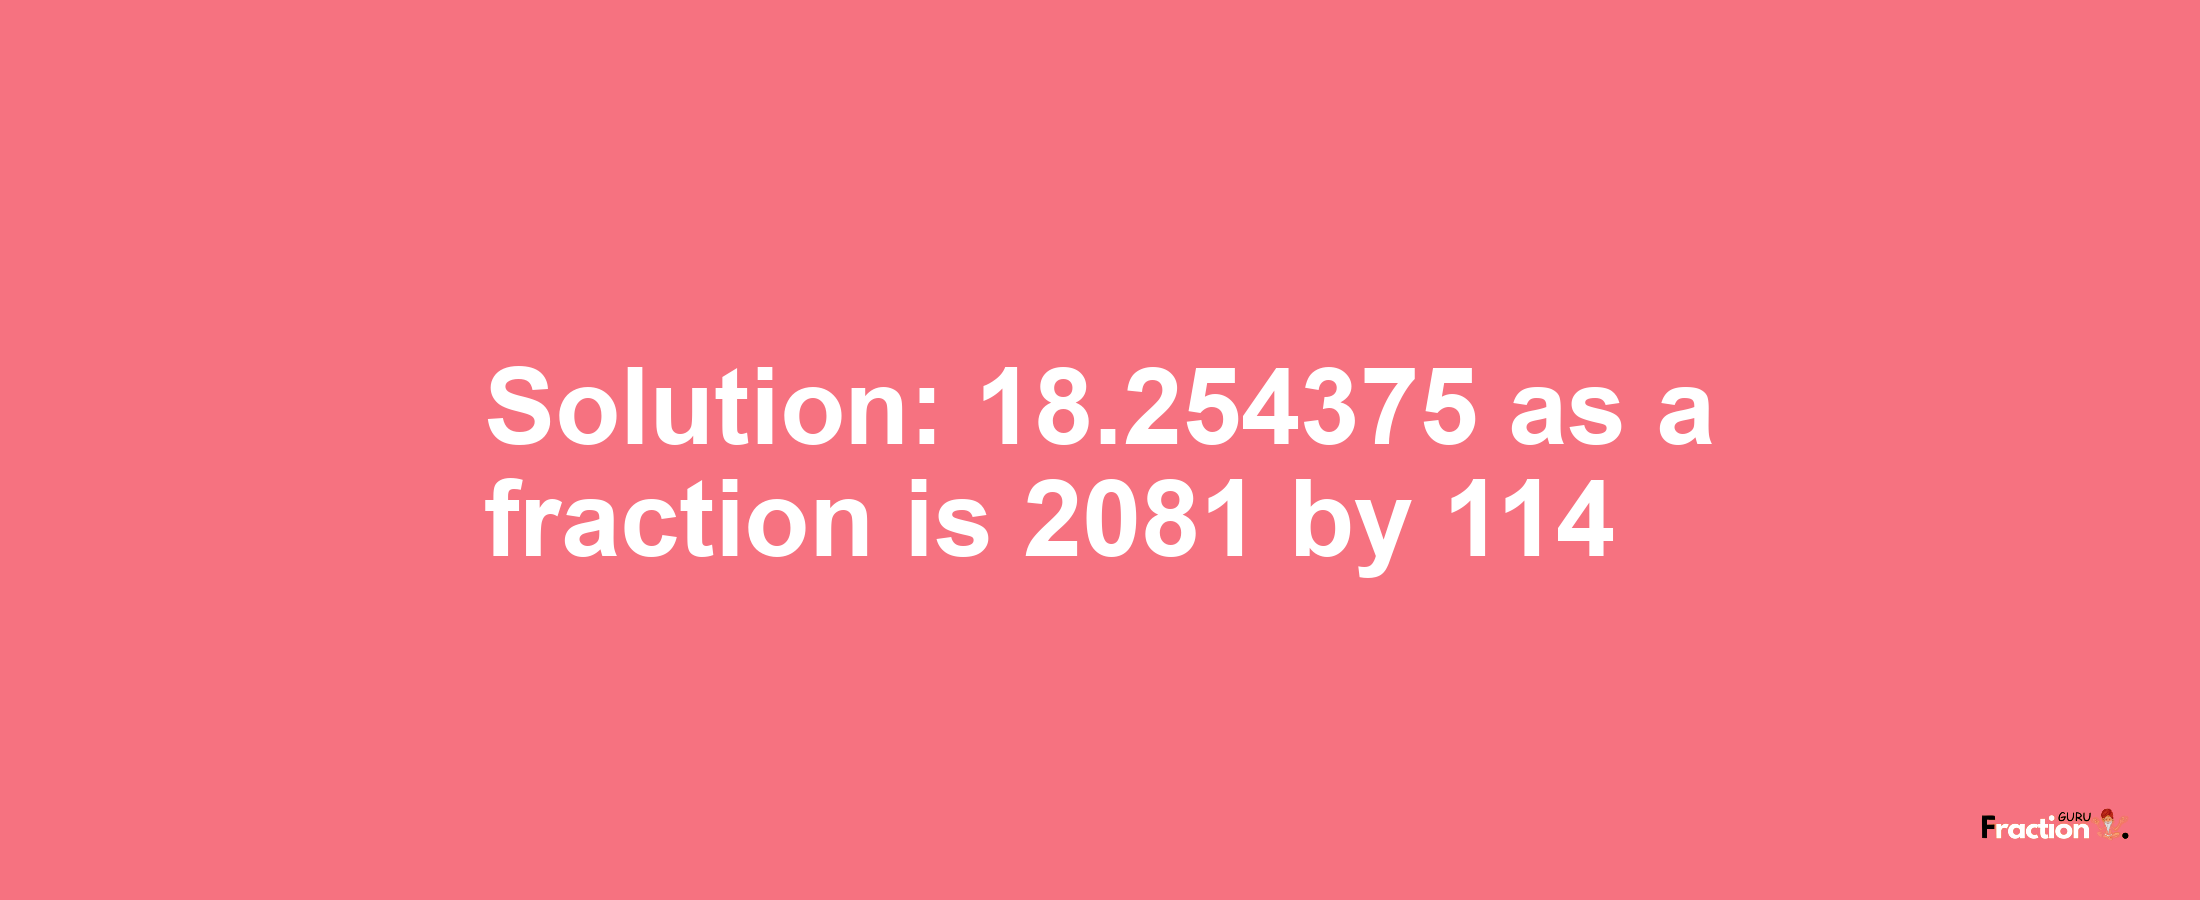 Solution:18.254375 as a fraction is 2081/114